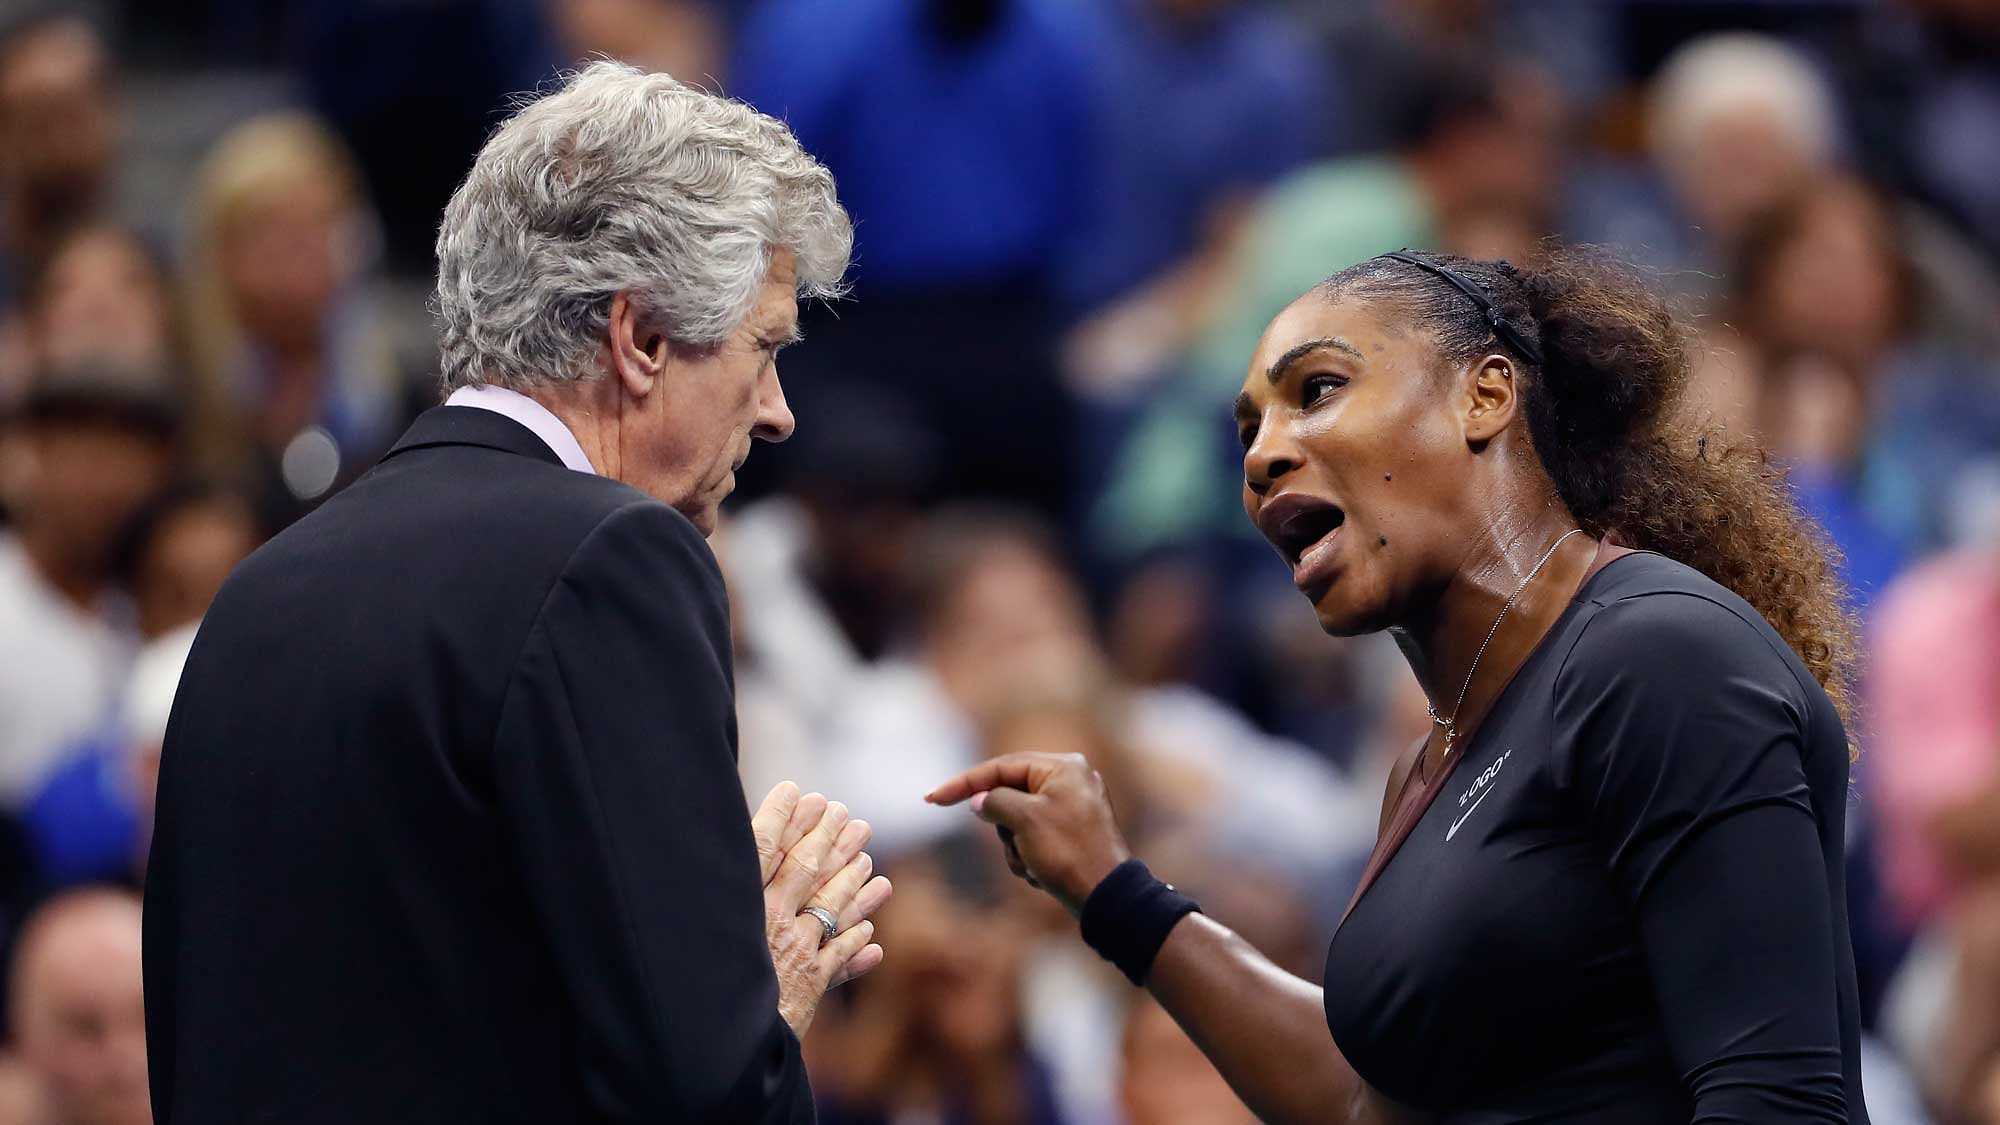 Serena Williams, right, talks with referee Brian Earley during the women’s final of the U.S. Open tennis tournament against Naomi Osaka, of Japan, Saturday, Sept. 8, 2018, in New York.&nbsp;